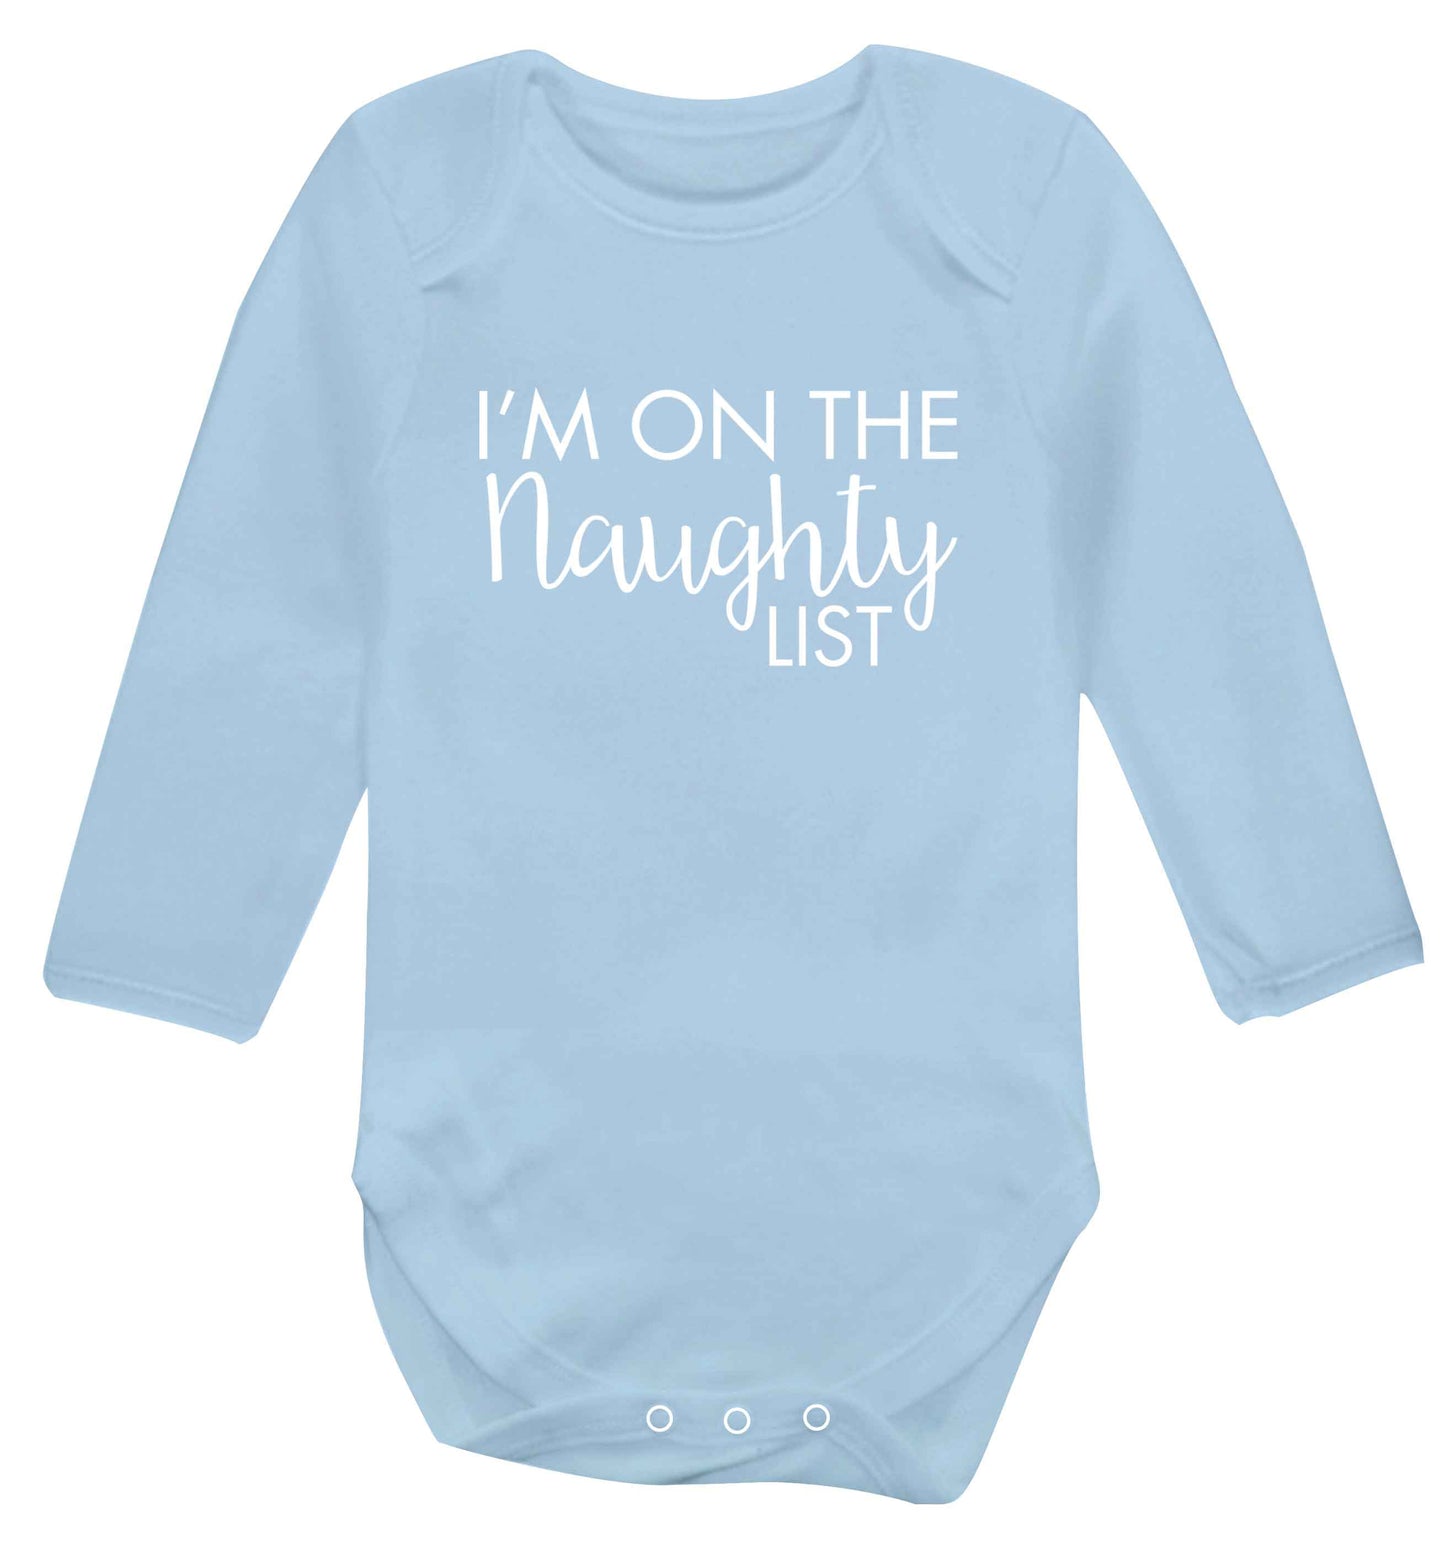 I'm on the naughty list baby vest long sleeved pale blue 6-12 months